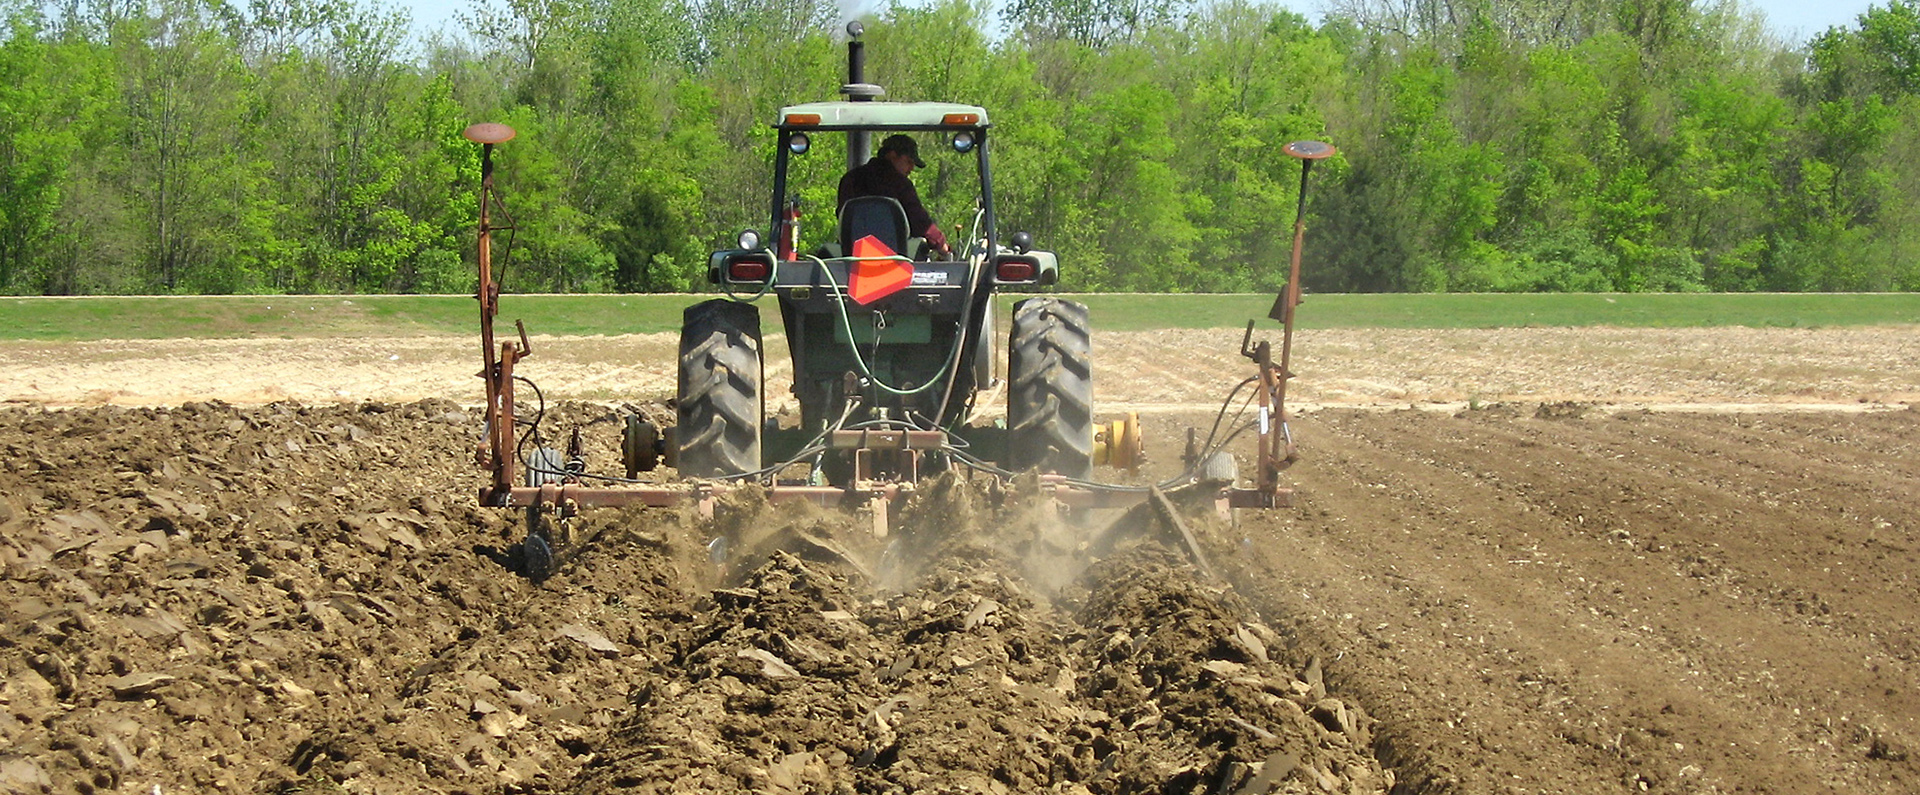 Poultry litter being incorporated into the soil during disking